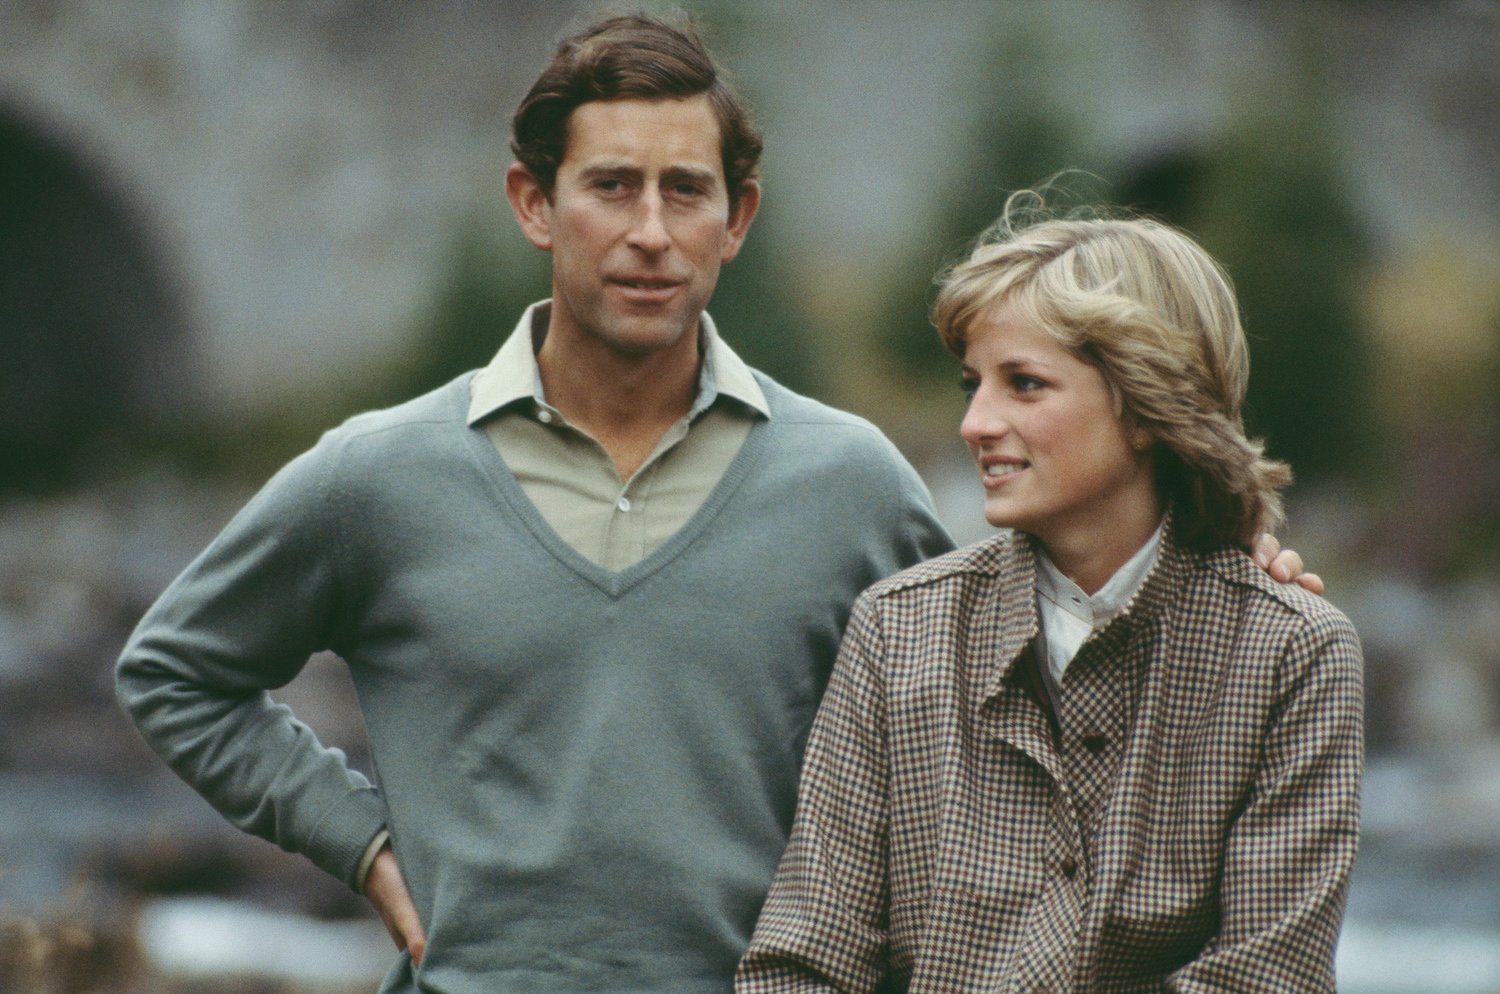 Princess Diana and Prince Charles on their honeymoon in Balmoral by the River Dee, August 1981